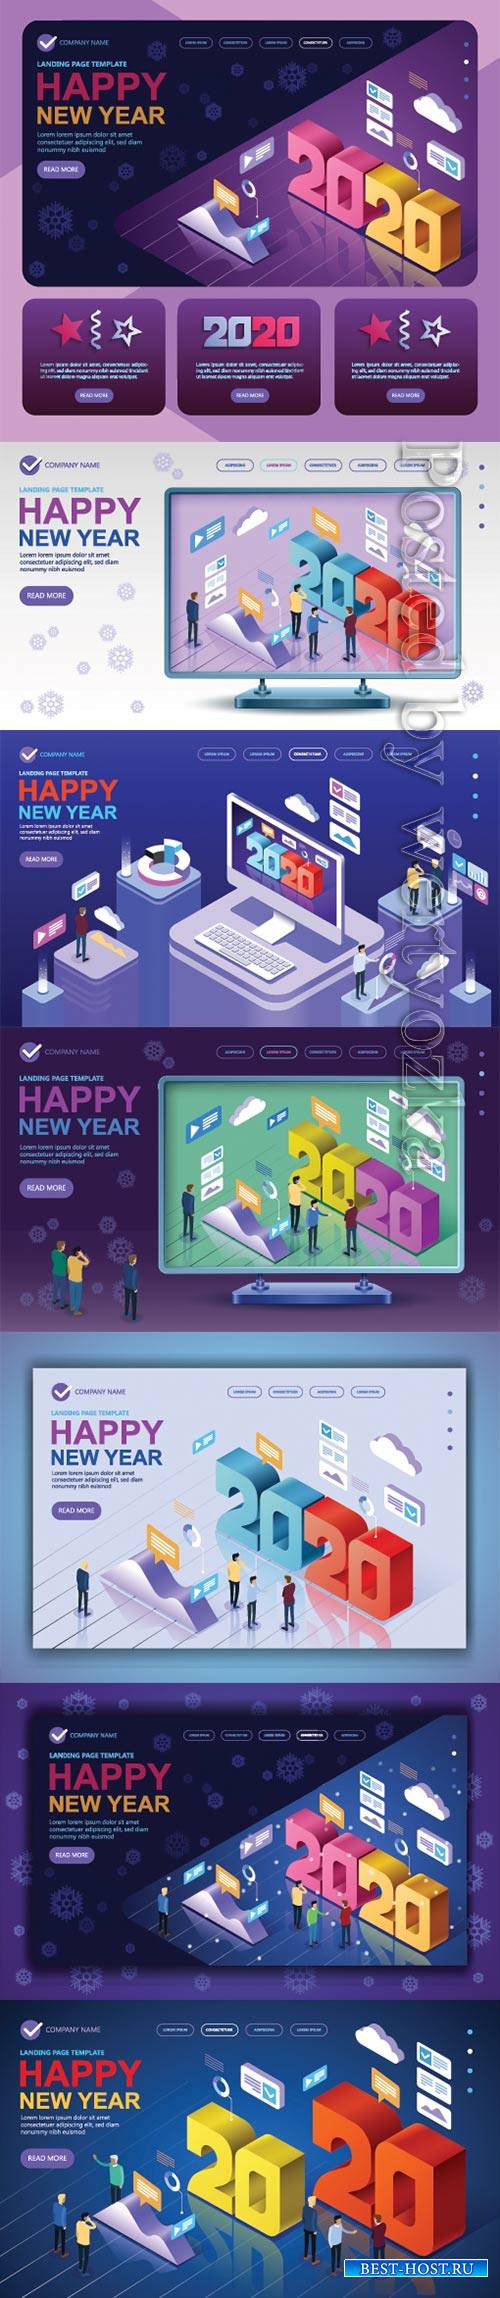 Isometric vector concept banner 2020 a Happy New Year greetings